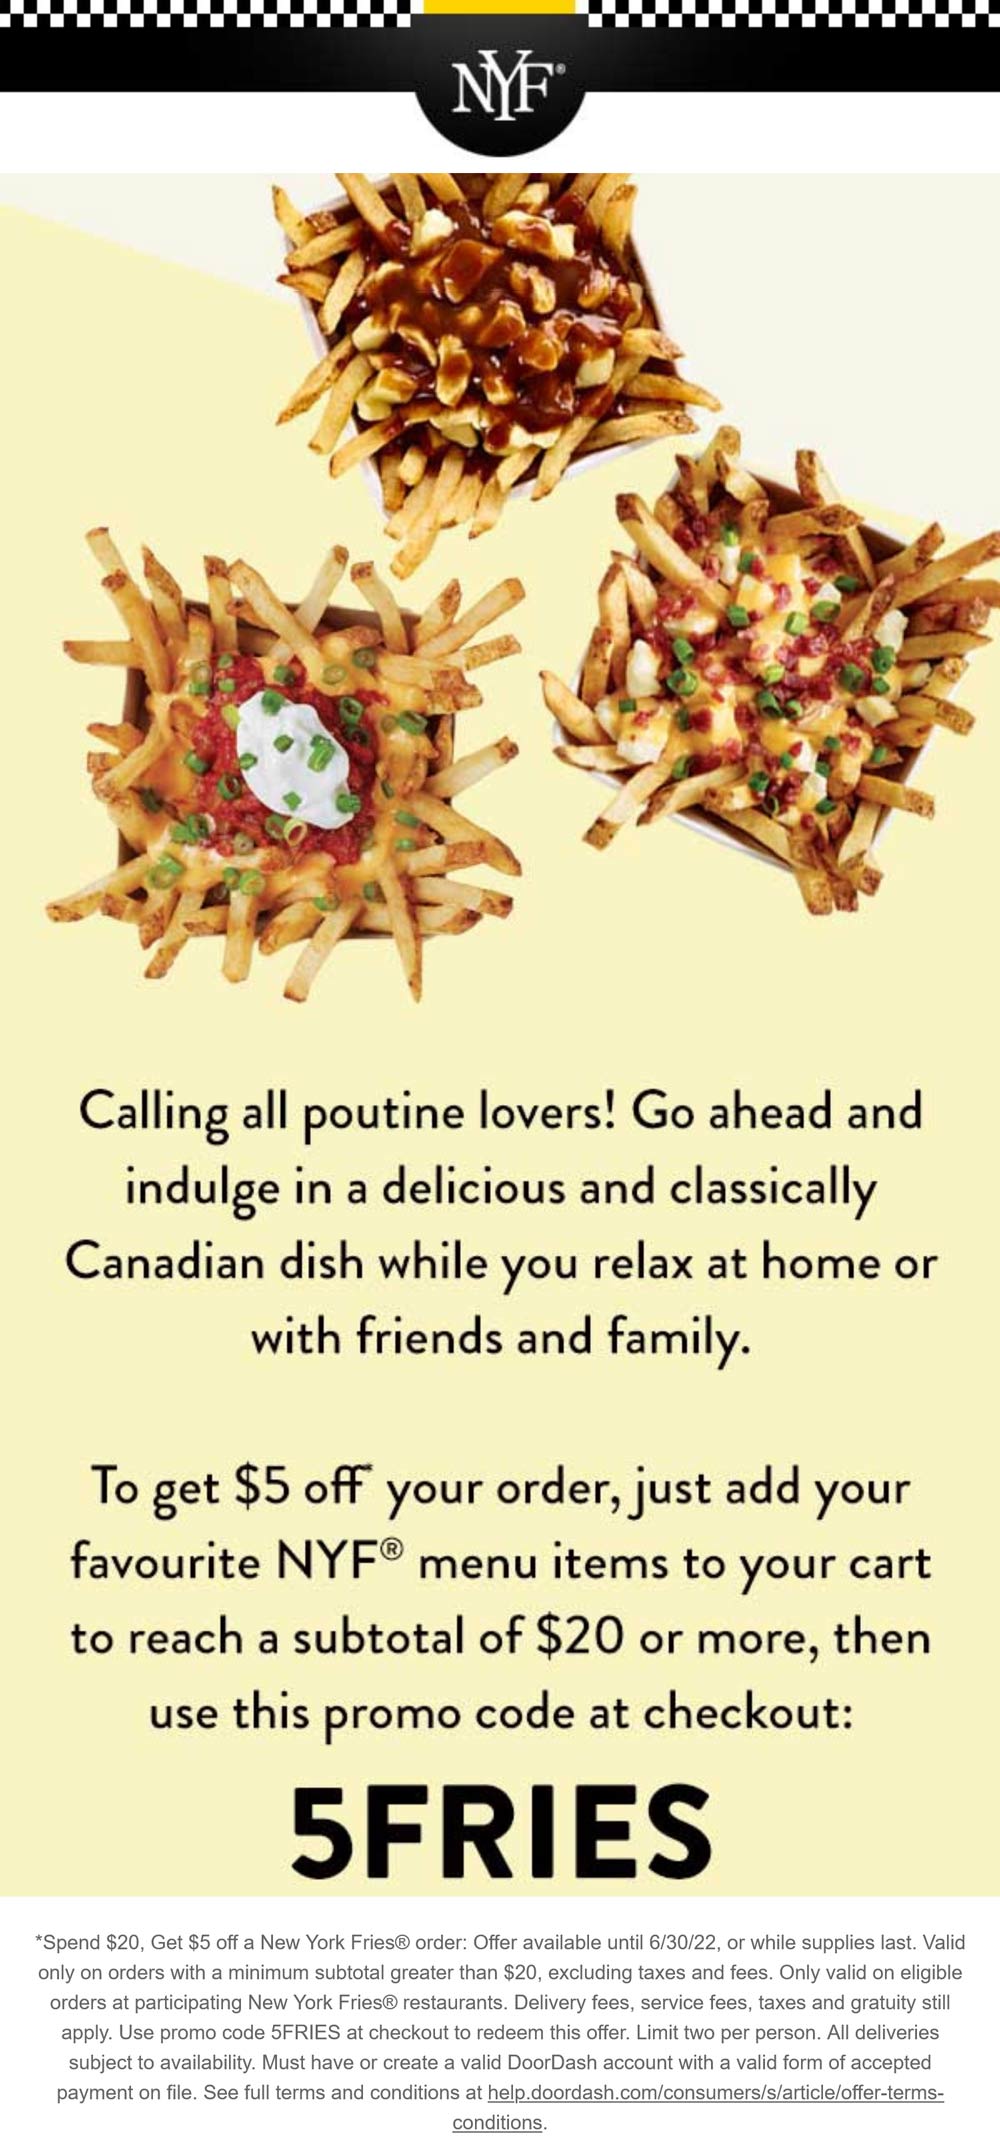 New York Fries restaurants Coupon  $5 off $20 on delivery at New York Fries via promo code 5FRIES #newyorkfries 